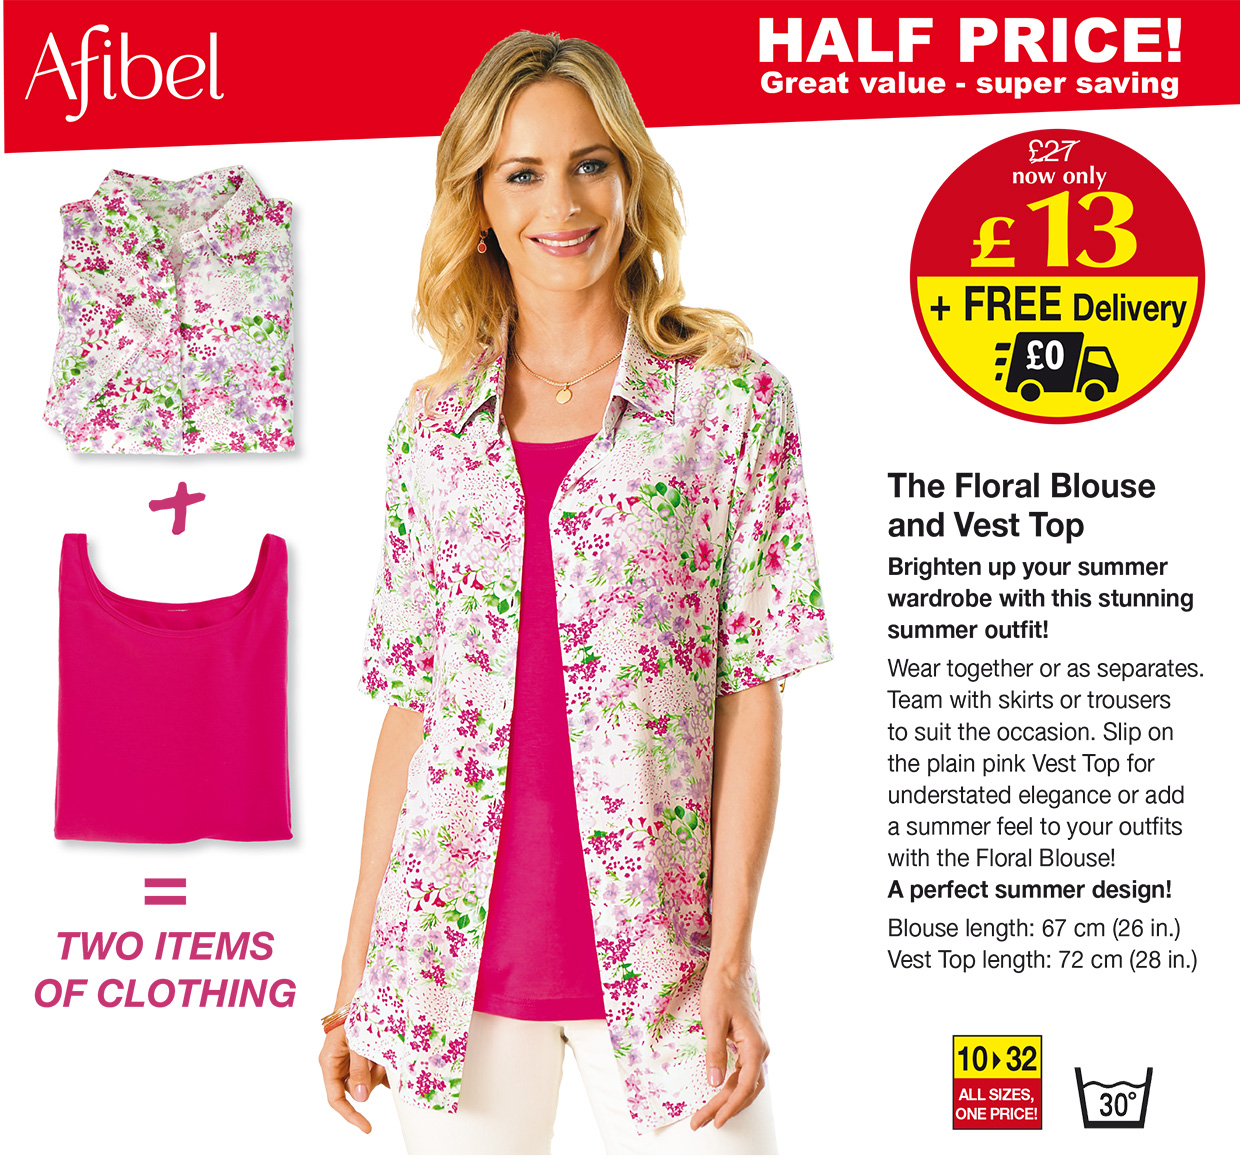 BESTSELLER - The floral blouse and vest top: Half Price, was £27, now only £13 + free delivery